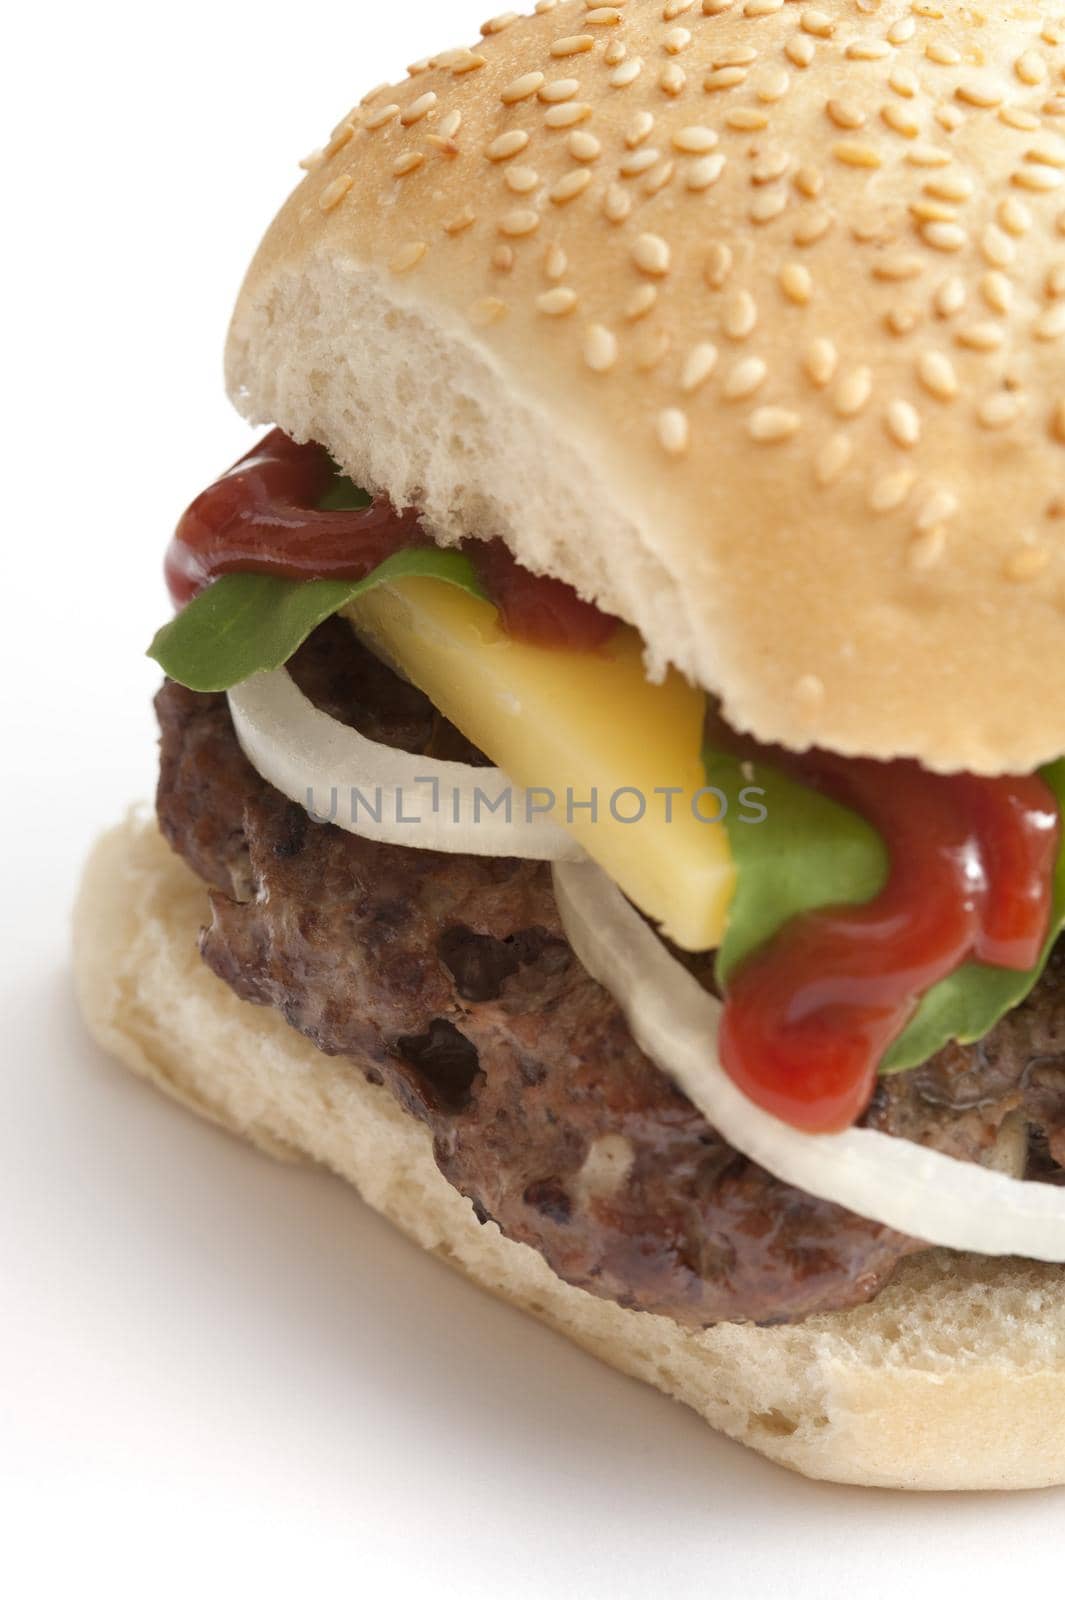 Cropped view of hamburger topped with cheese, lettuce, onion and ketchup with sesame bun over white